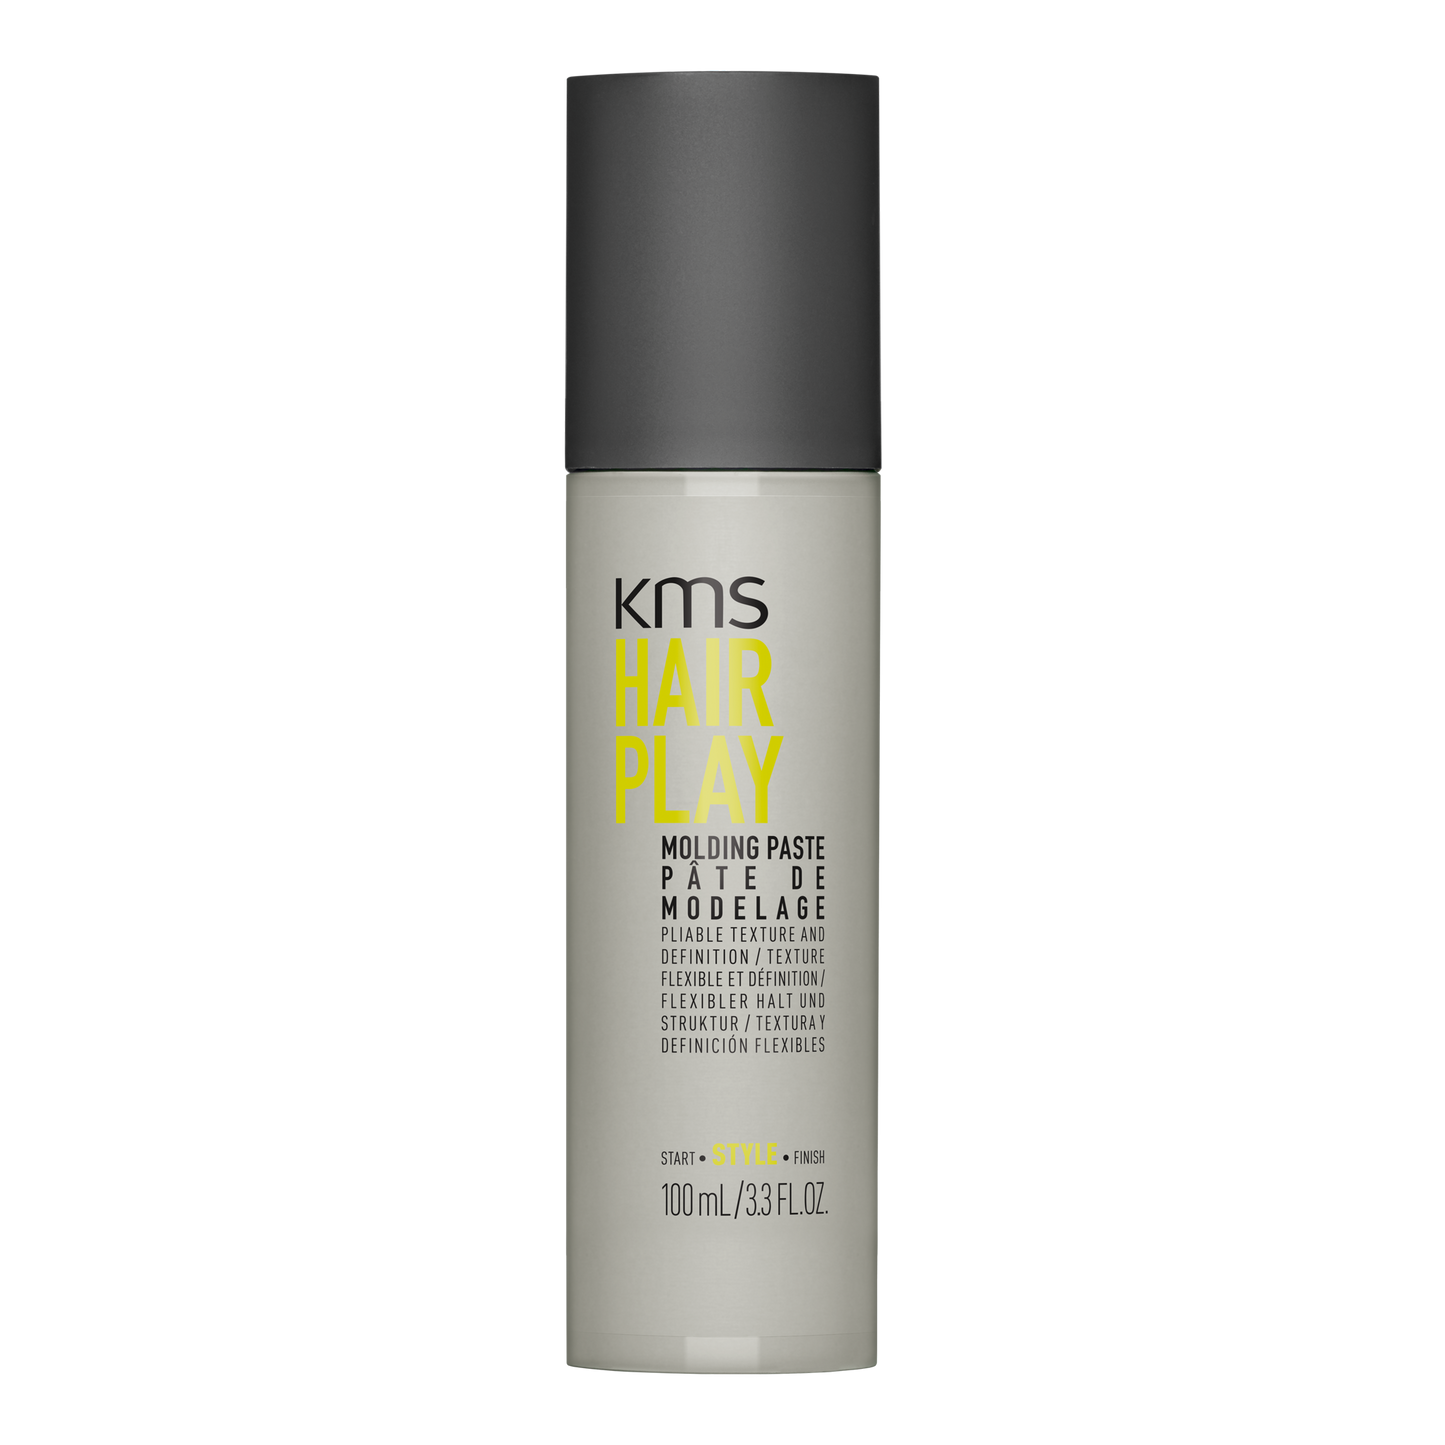 KMS HAIRPLAY Molding Paste 100mL